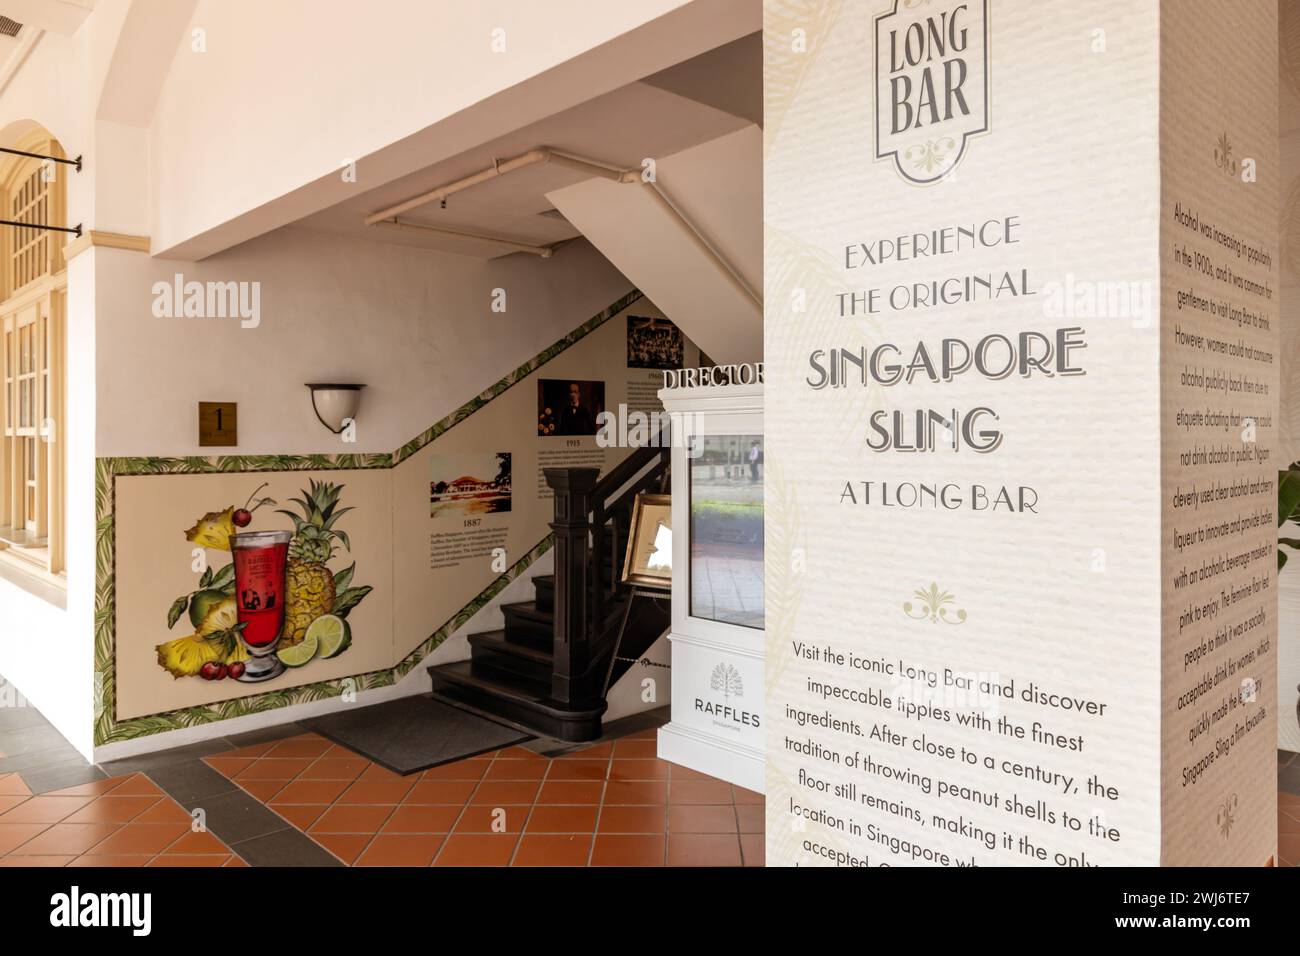 Sign and entrance to the Long Bar in Raffles Hotel, Singapore Stock Photo